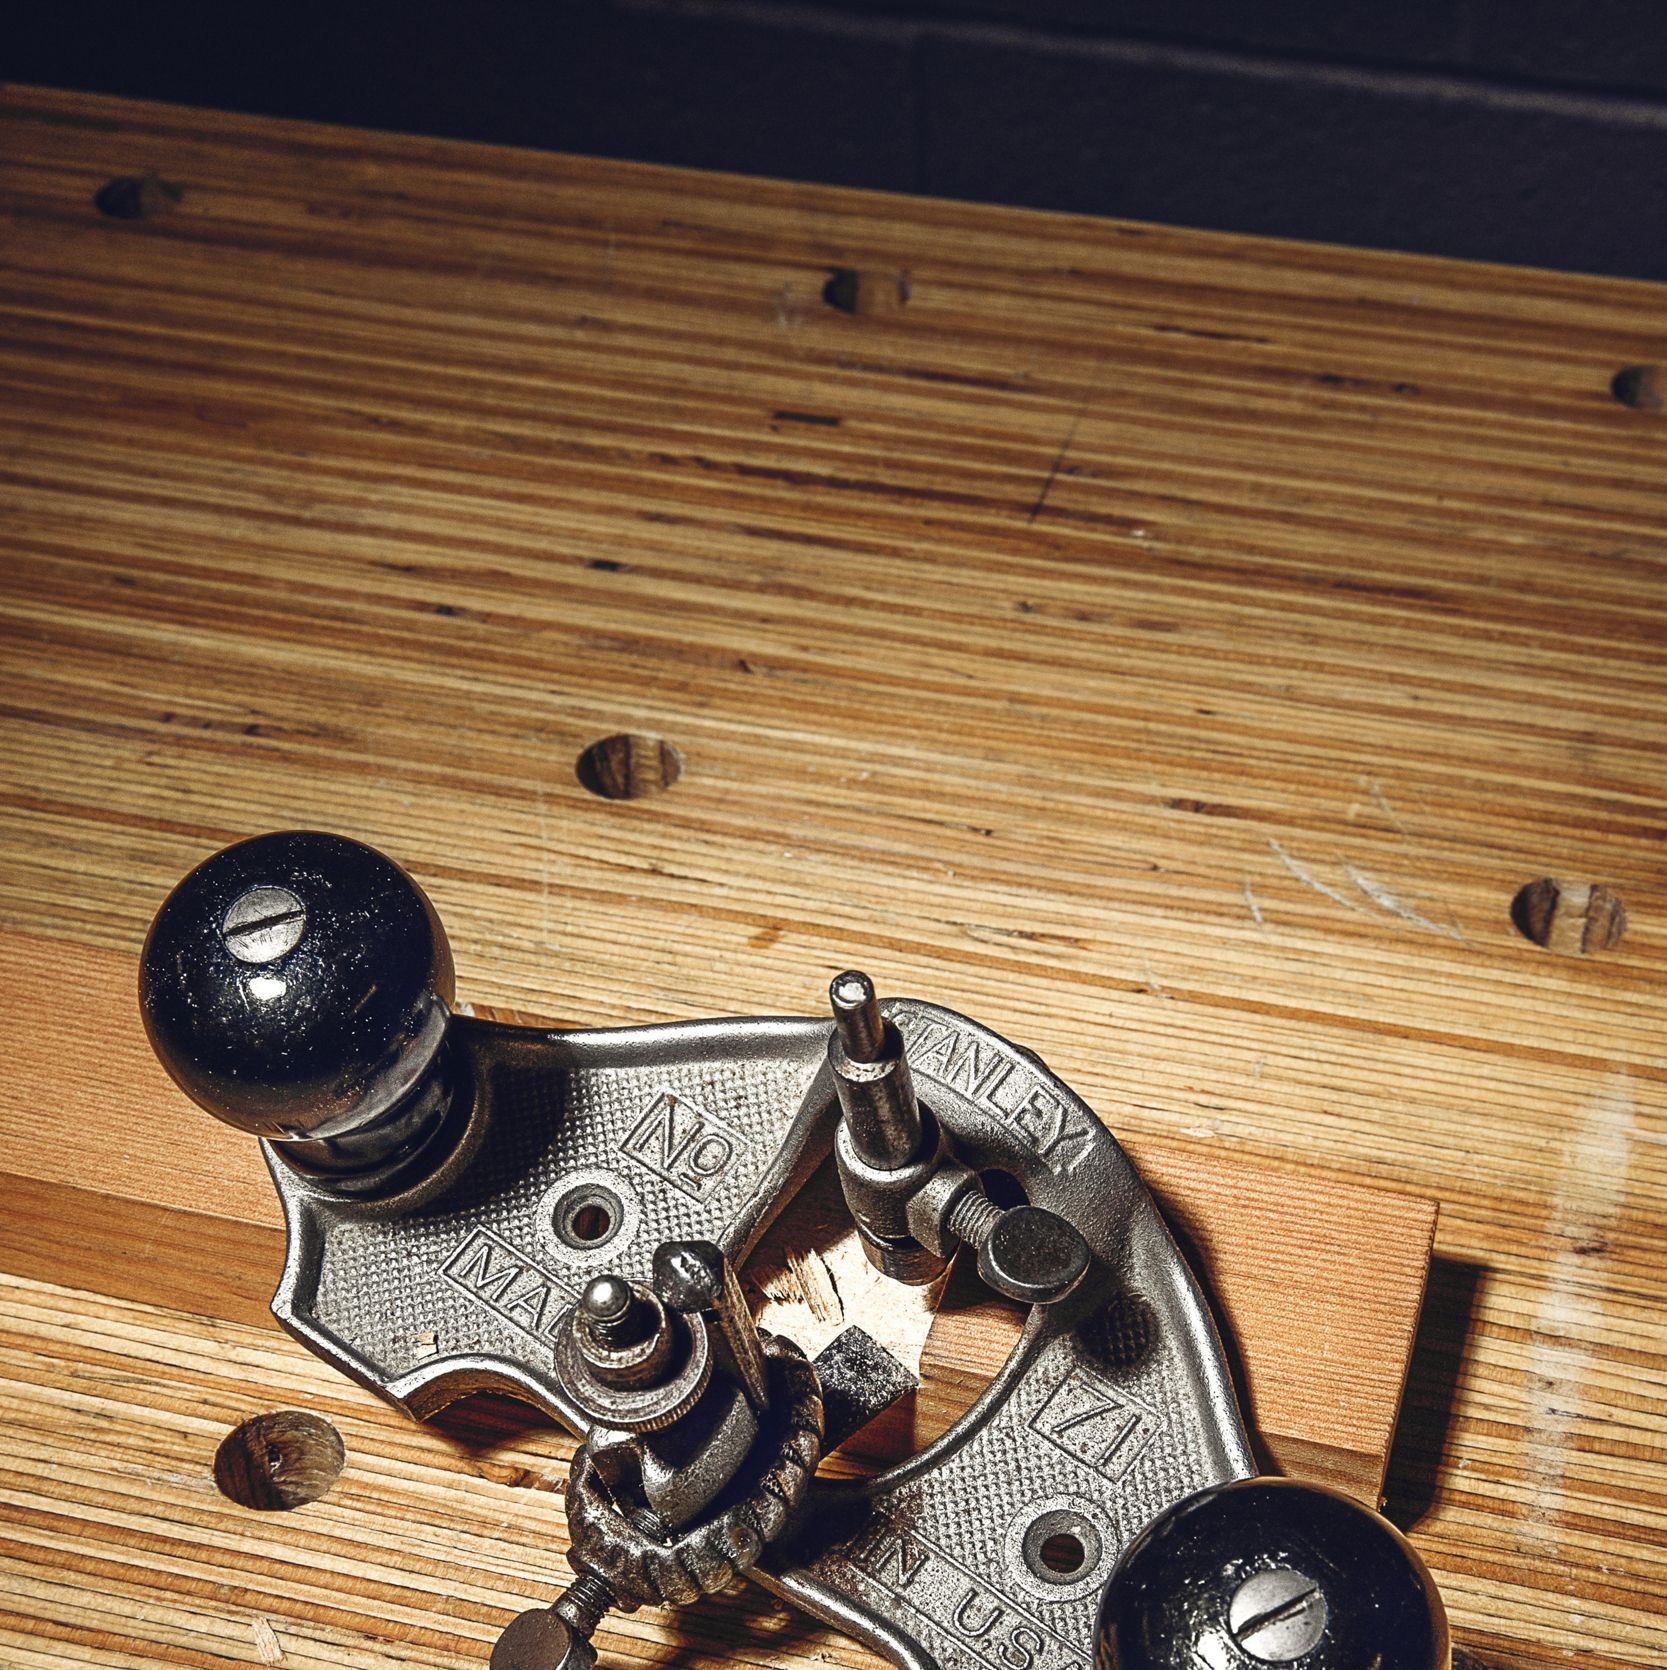 Stanley's No. 71 Router Plane: Old Tools Never Die, They Just Need to Be Resharpened